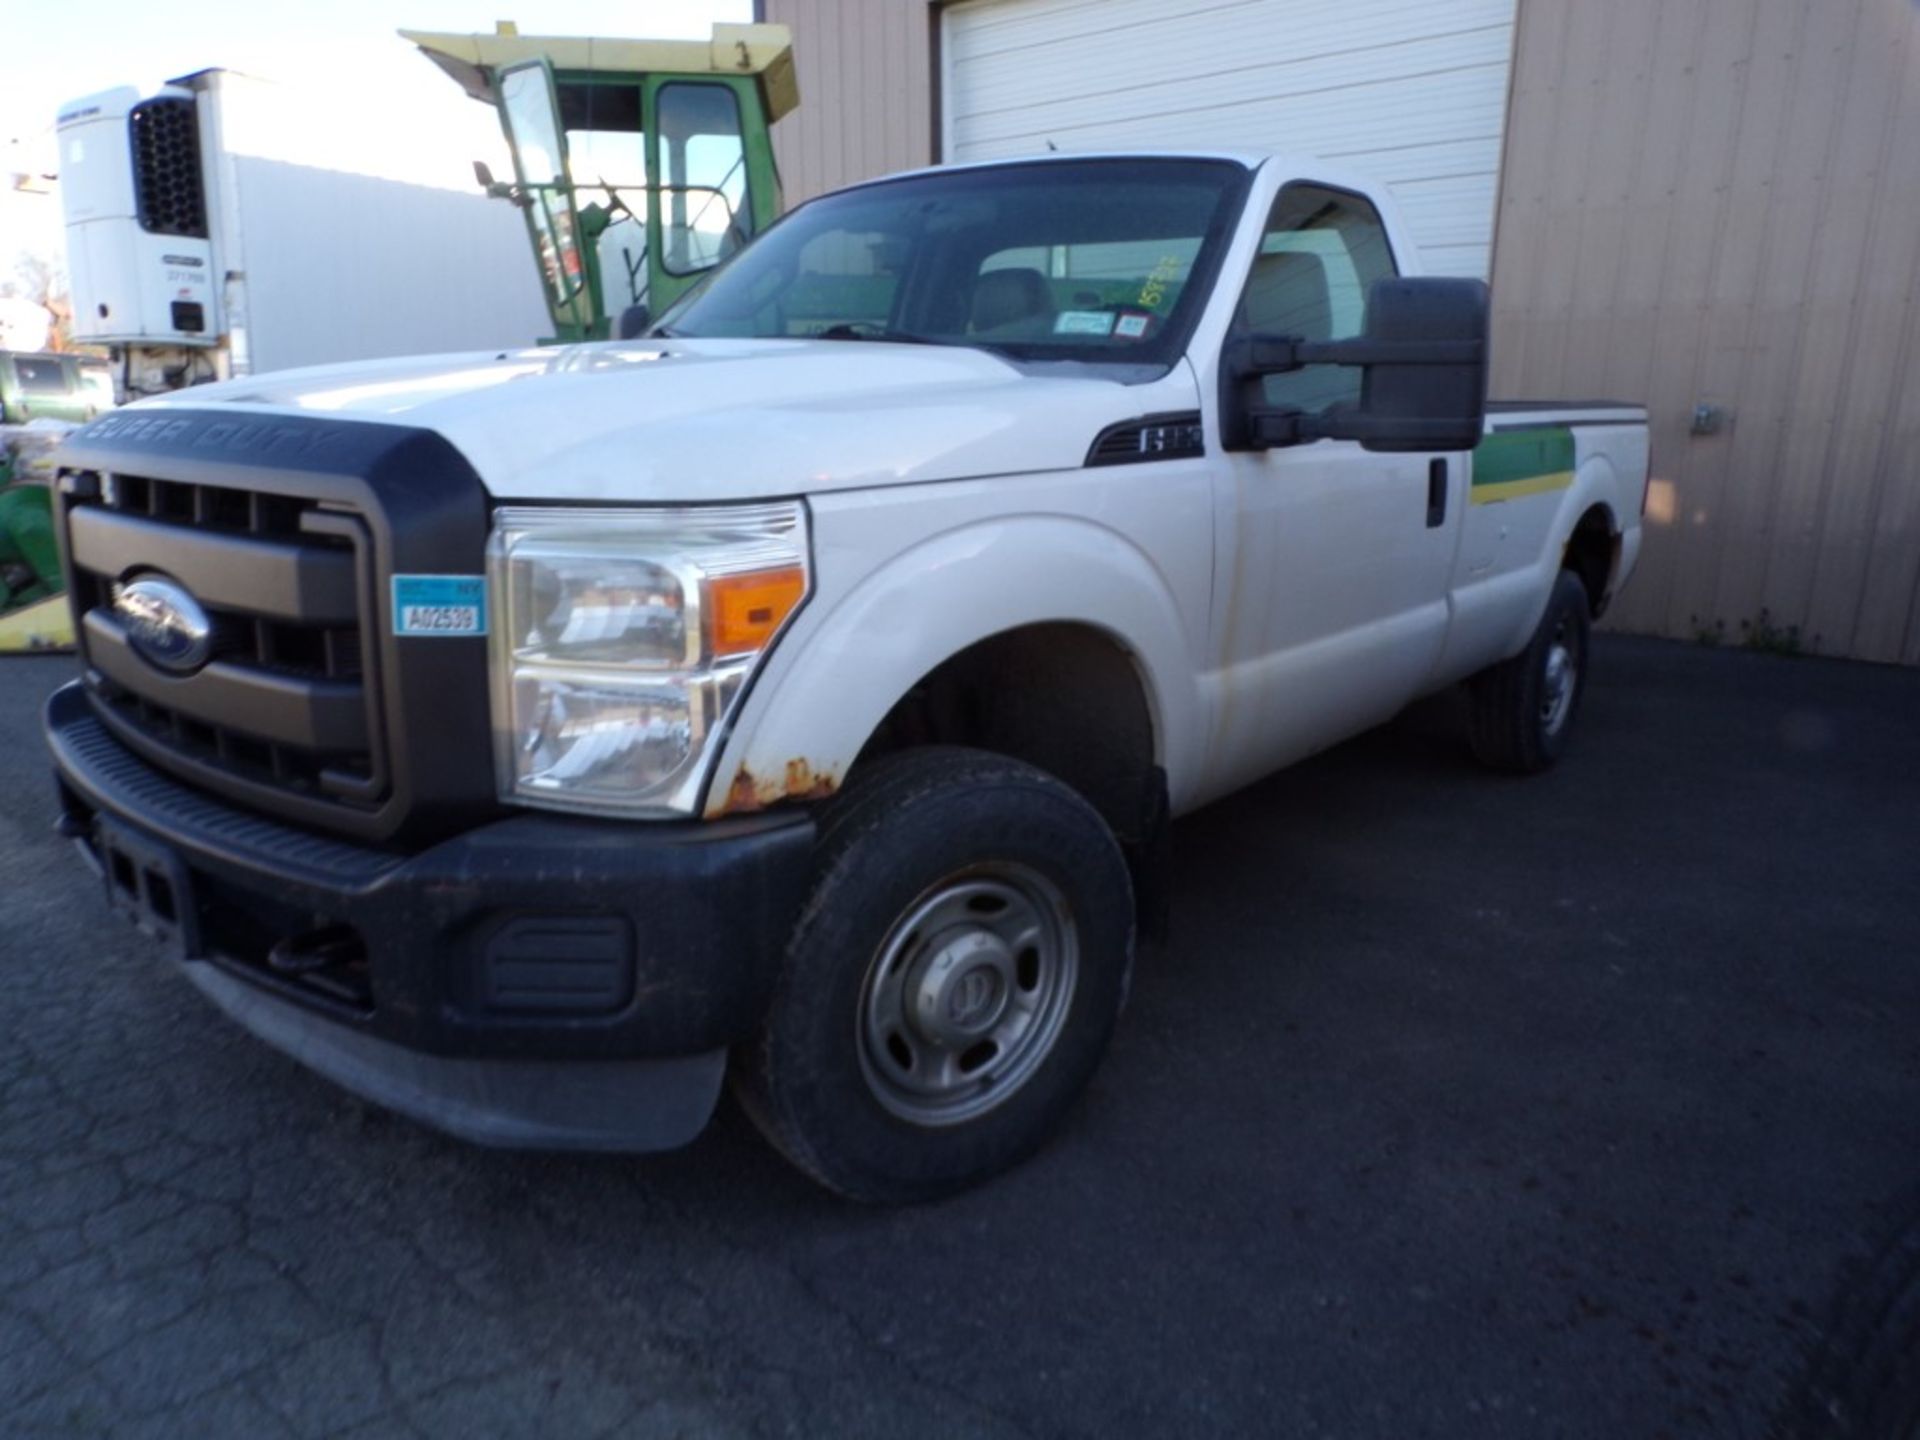 2012 Ford F-150 4 WD Reg Cab with 8' Box, Auto, 158,726 Miles, Vin # 1FTBF2B69CEA04879 - HAVE - Image 2 of 6